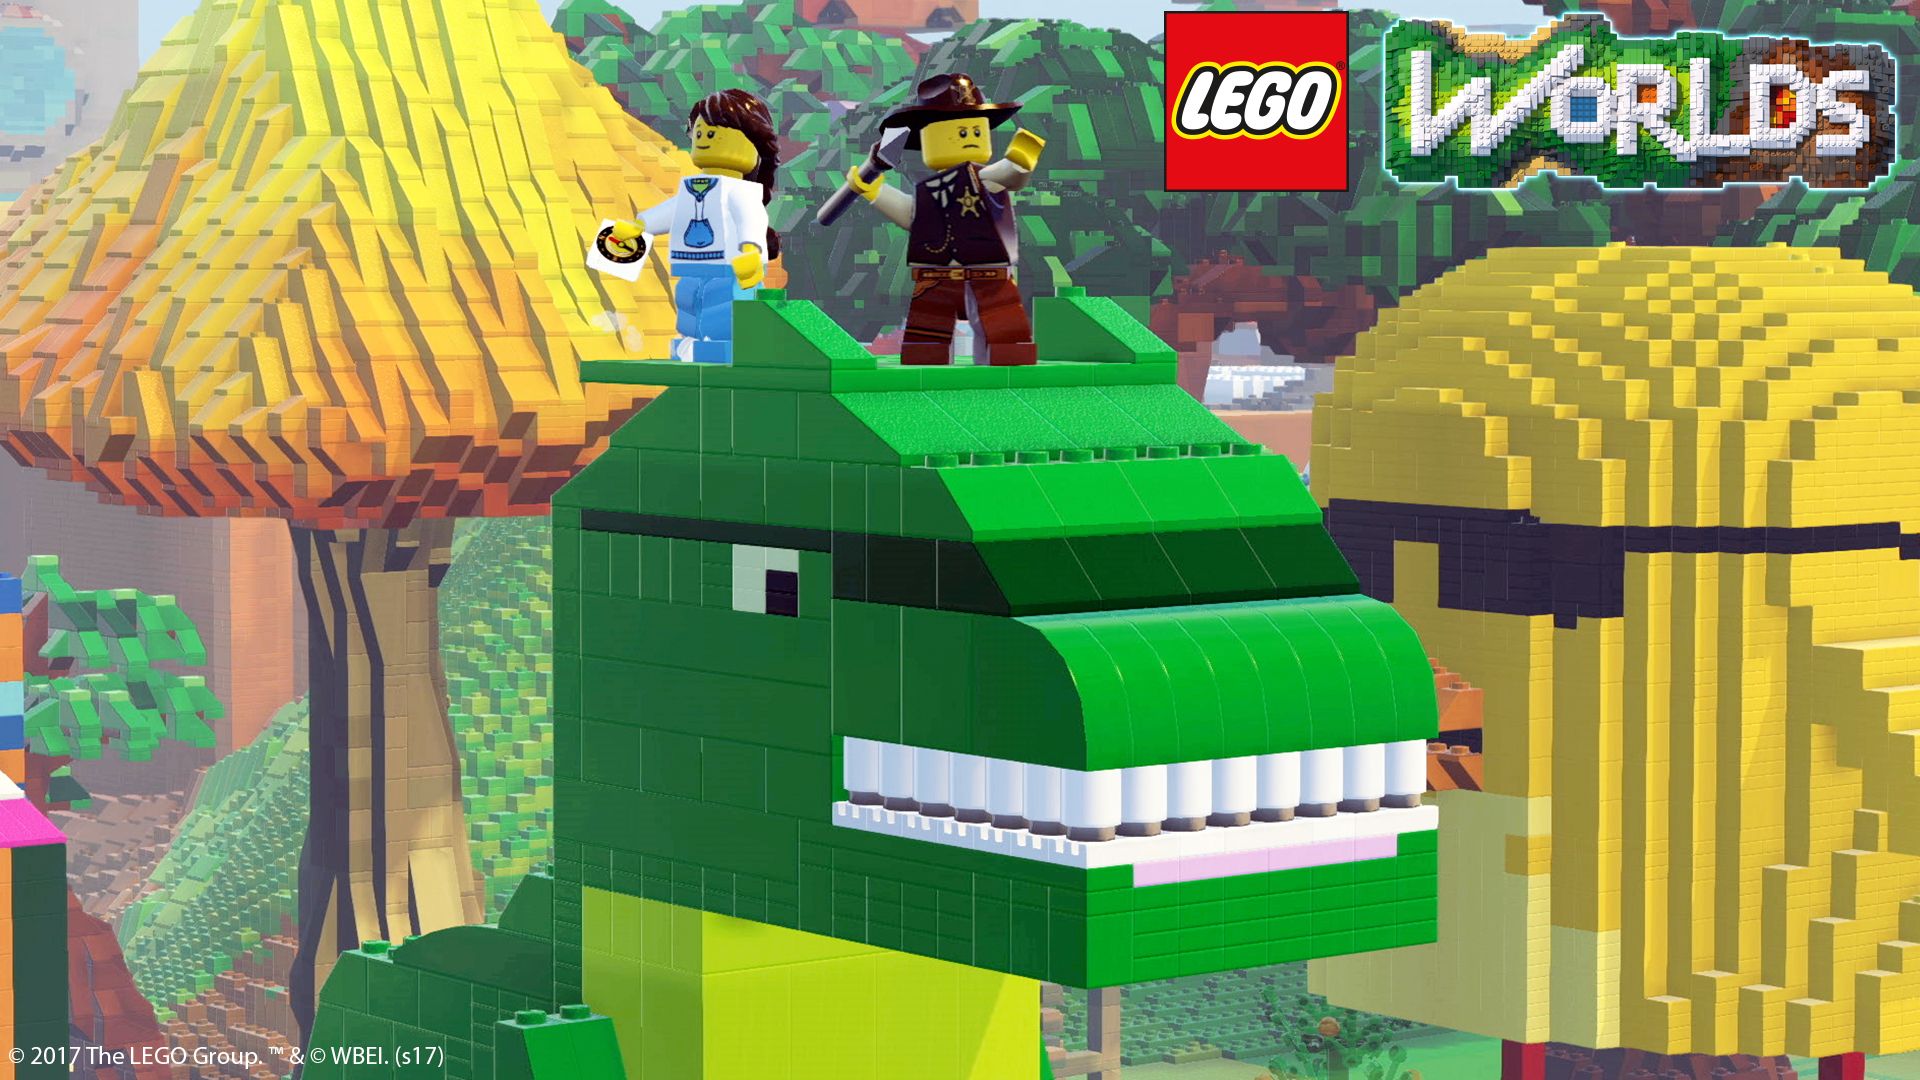 LEGO Worlds Lets You Become A Master Builder With LEGO Bricks